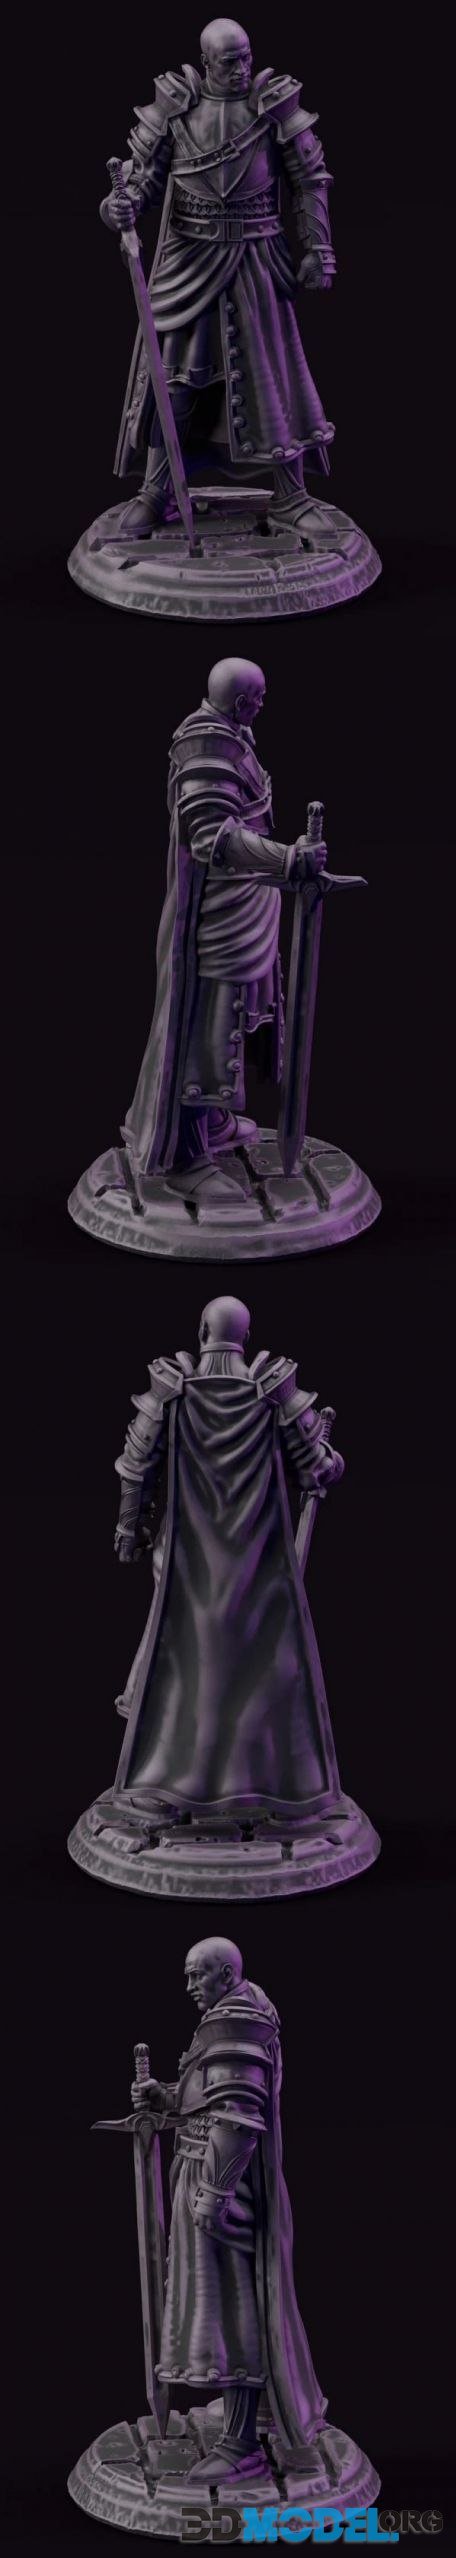 Knight Lord – Sculpture